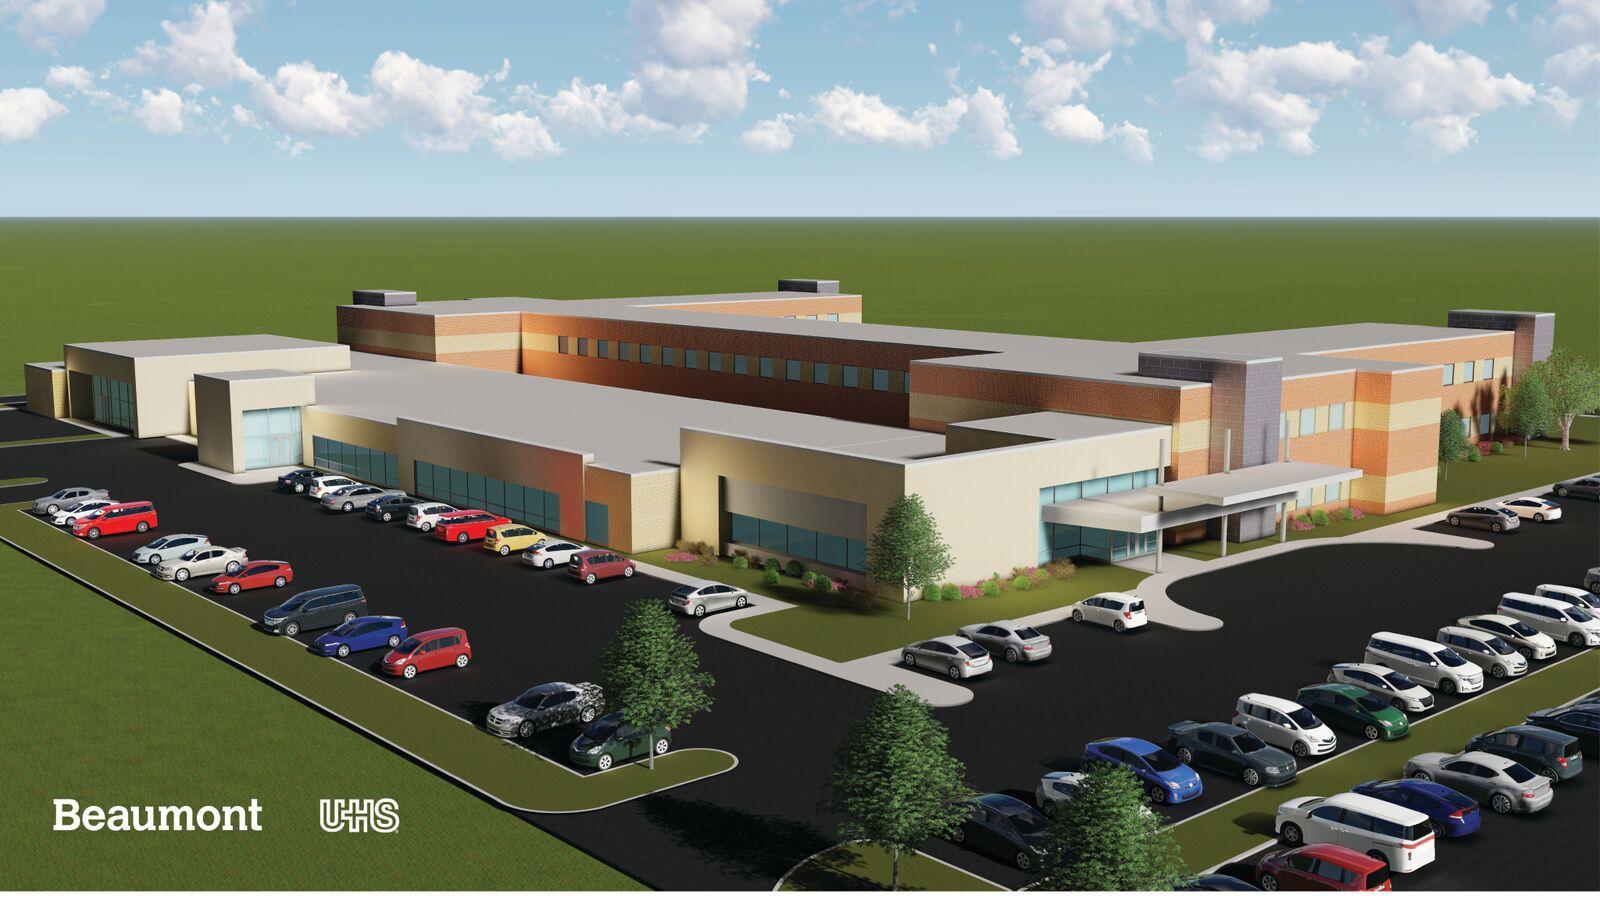 Beaumont Michigan Logo - Beaumont reveals plans for new mental health hospital, services ...